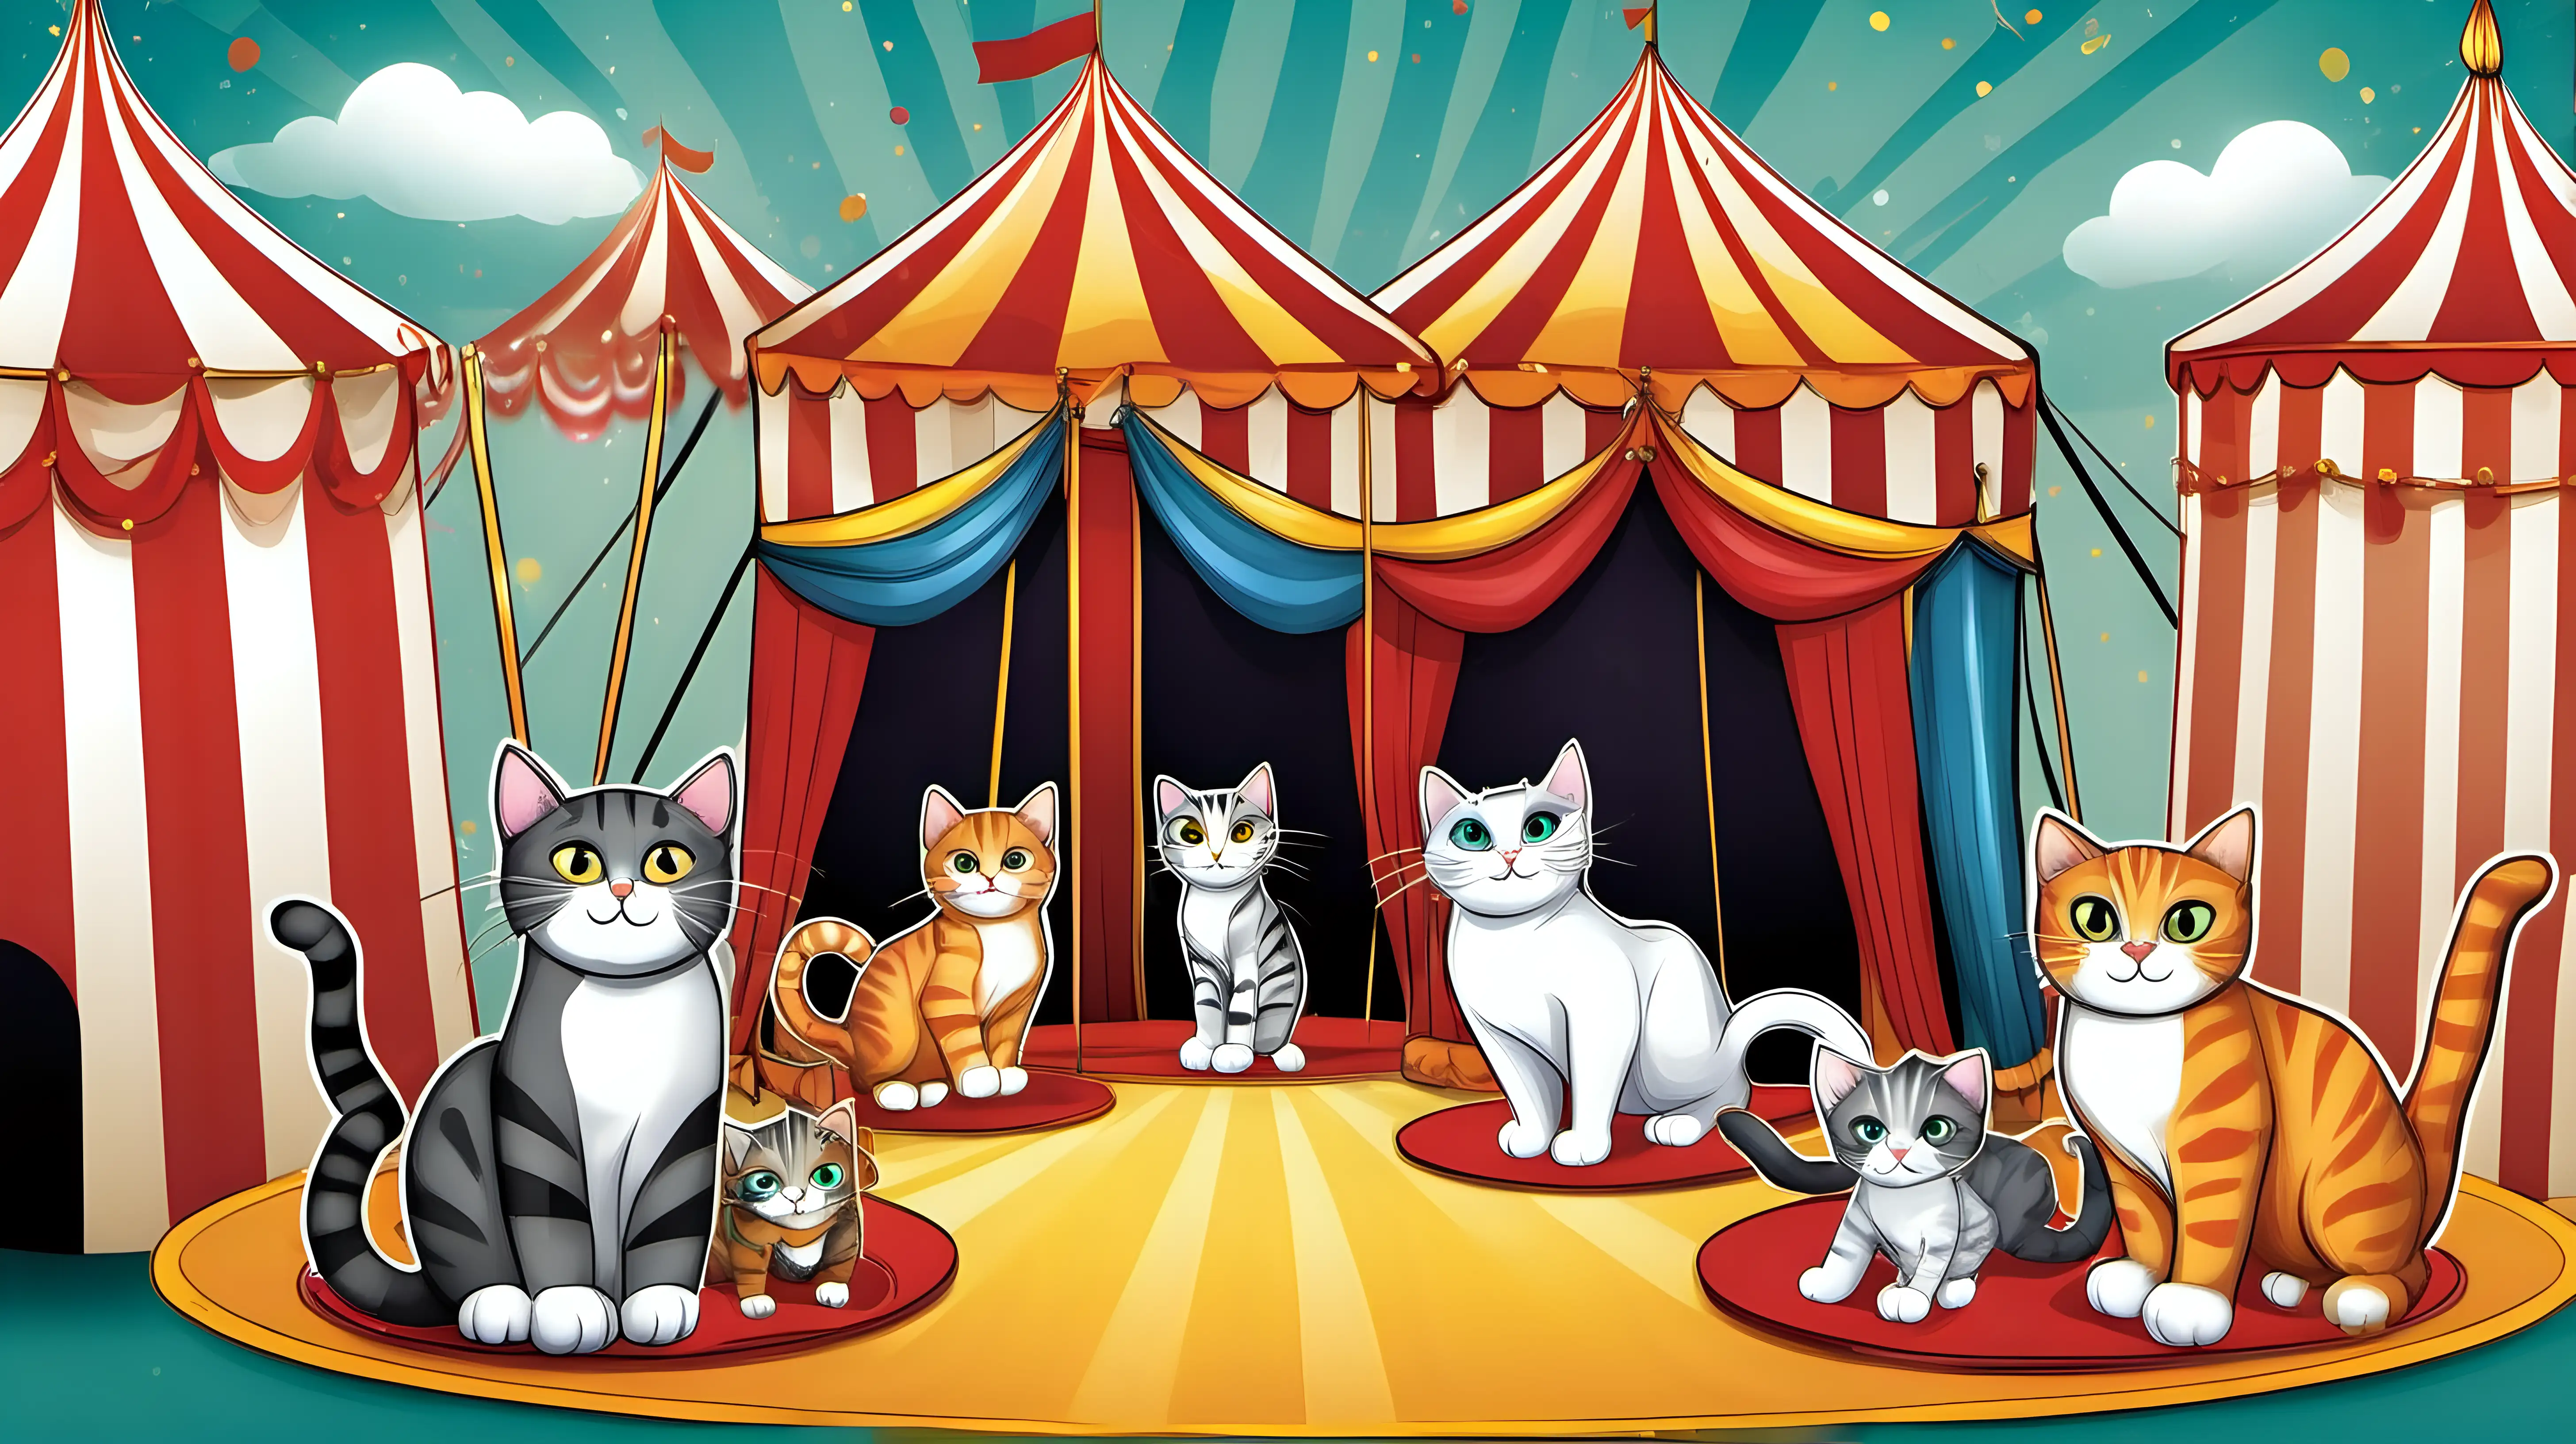 "Design a cat circus with acrobatic felines performing daring stunts under the big top, showcasing their agility and entertaining the audience with their cuteness."